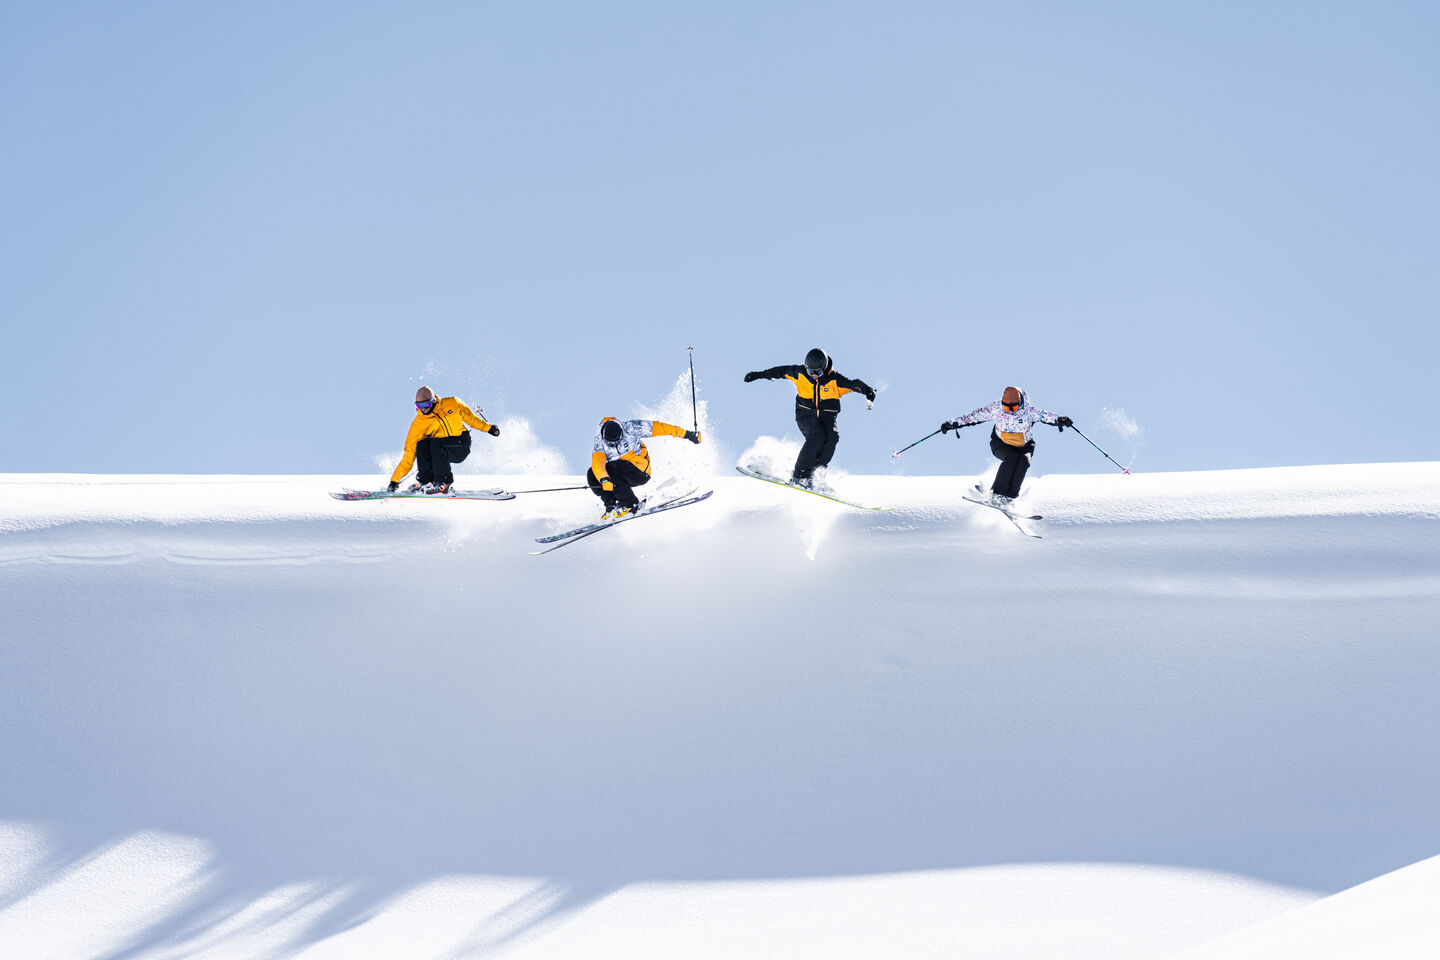 four skiers in yellow jackets jumping off a hill at the same time